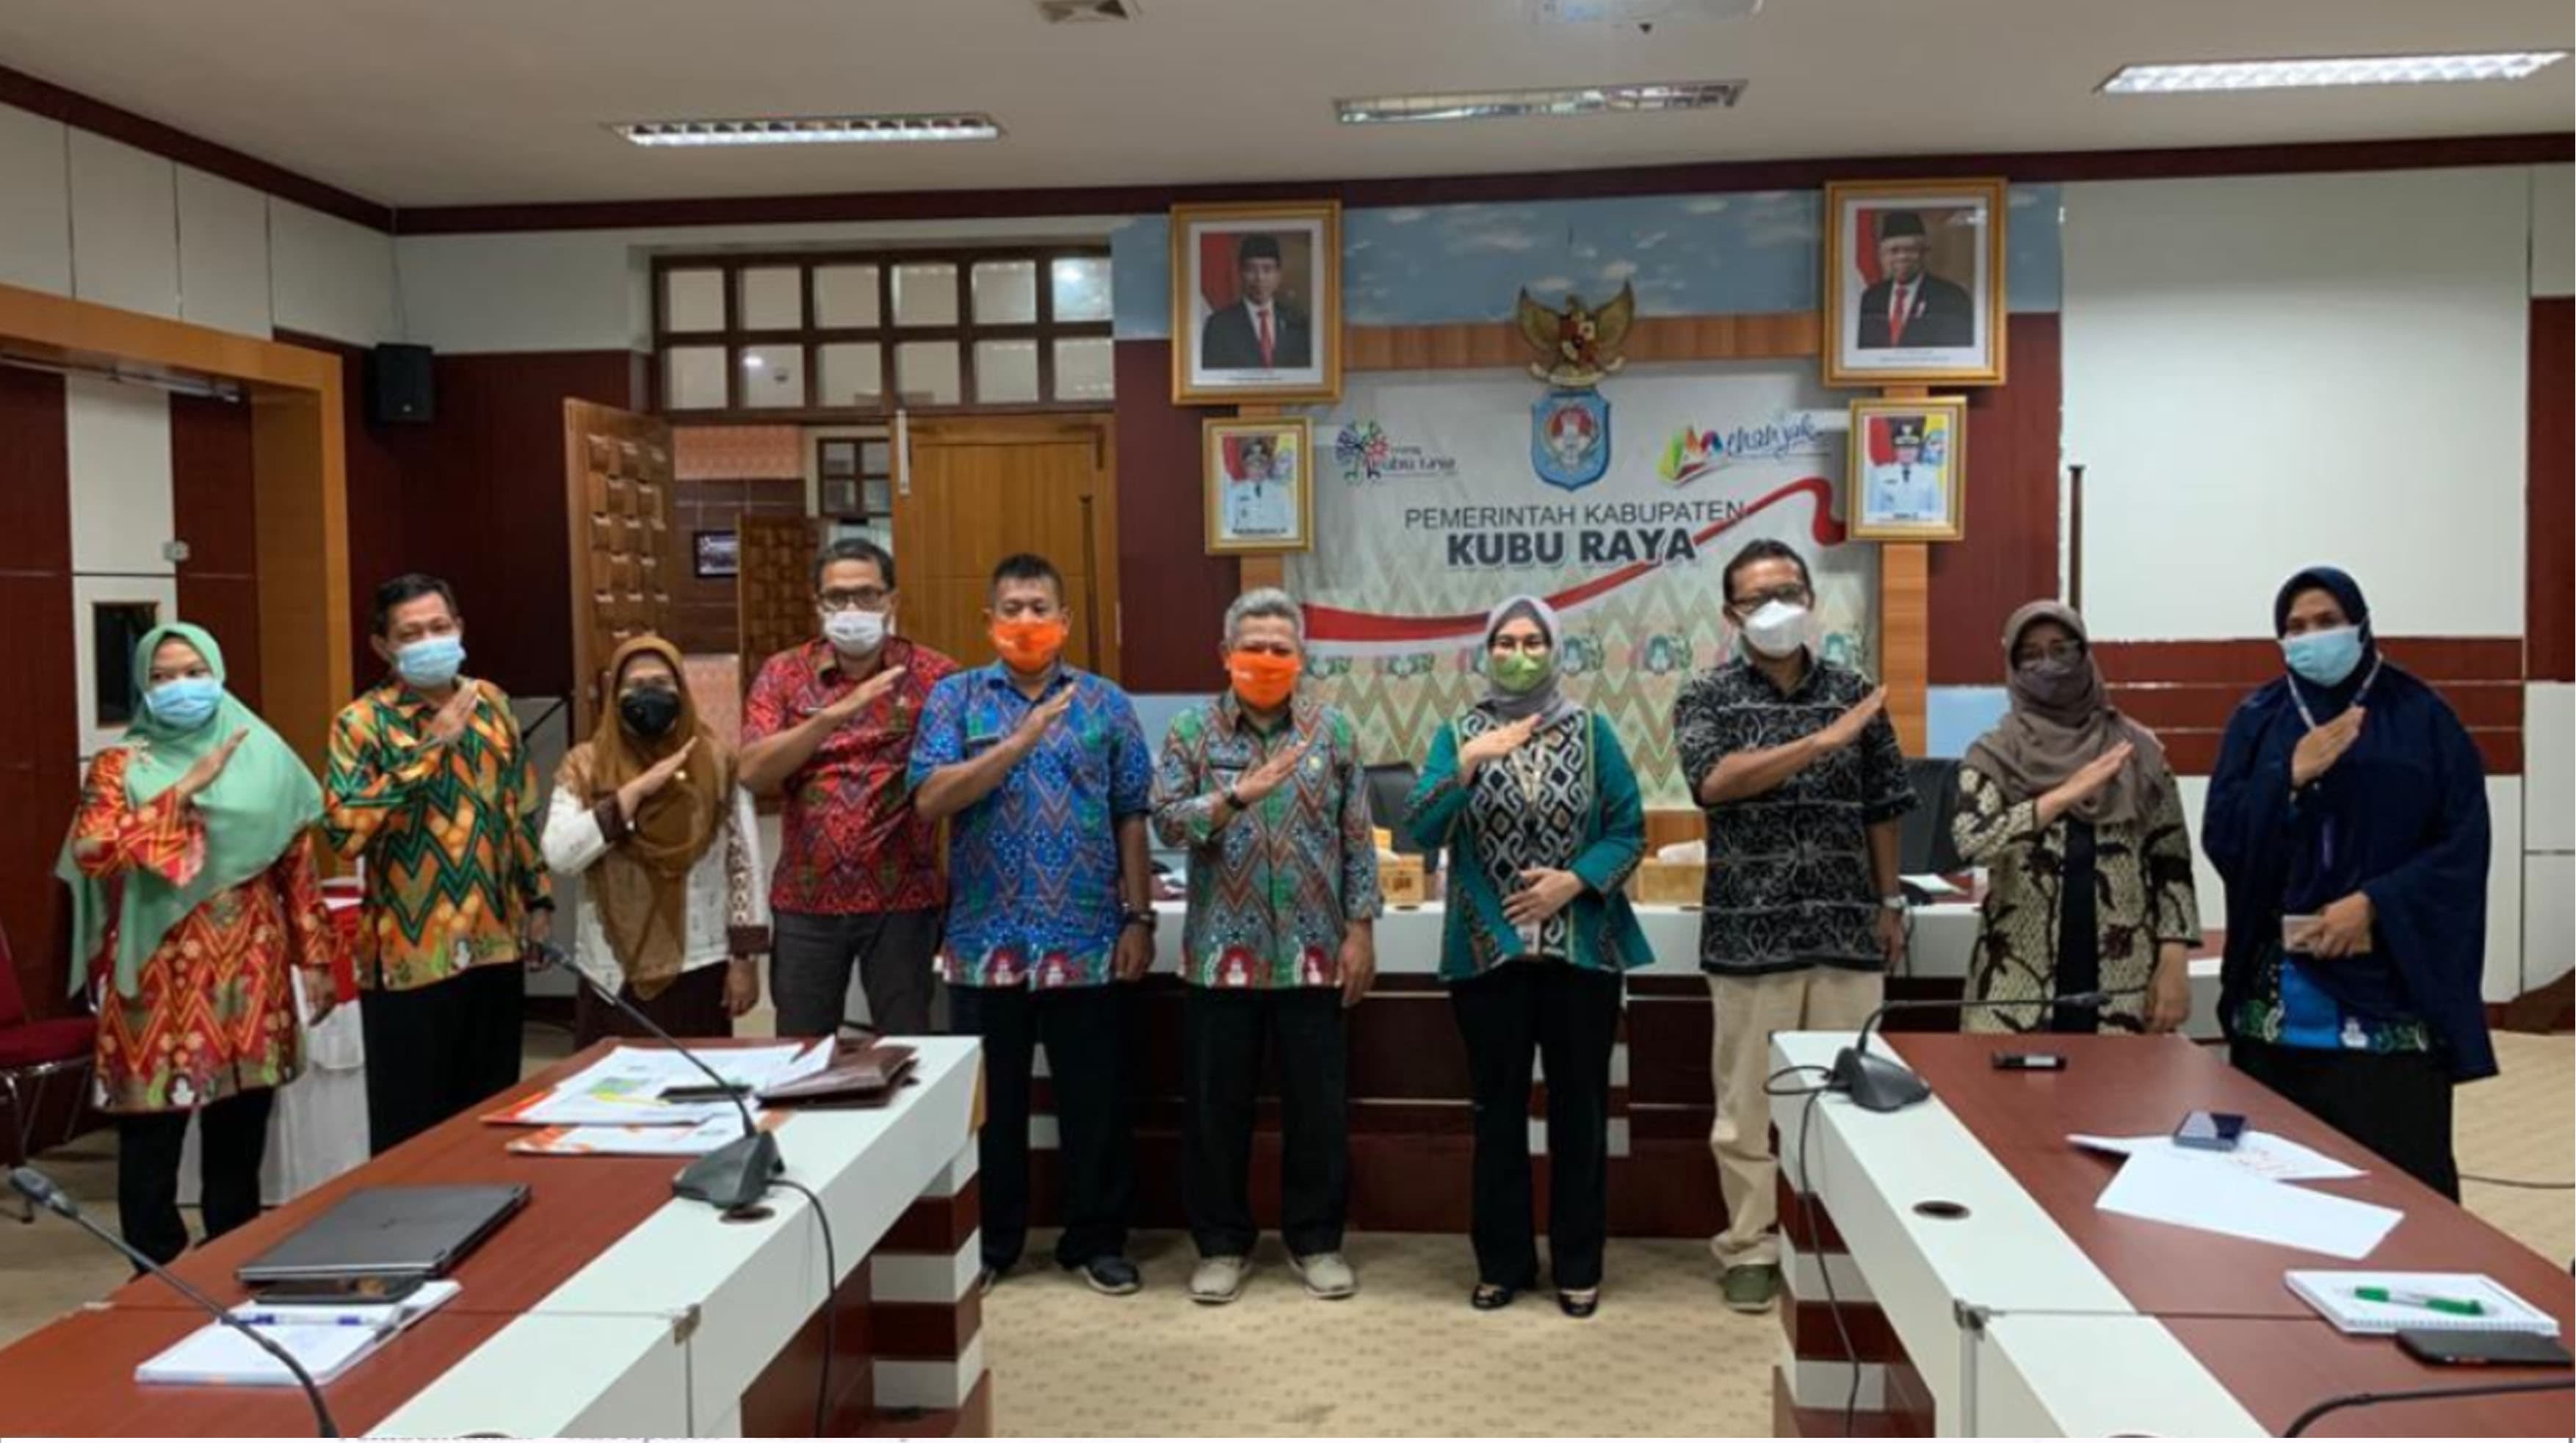 Facilitating the meetings between  potential investors for coconut sugar development (from TLFF and Lion Heart) and The Government of Kubu Raya Regency